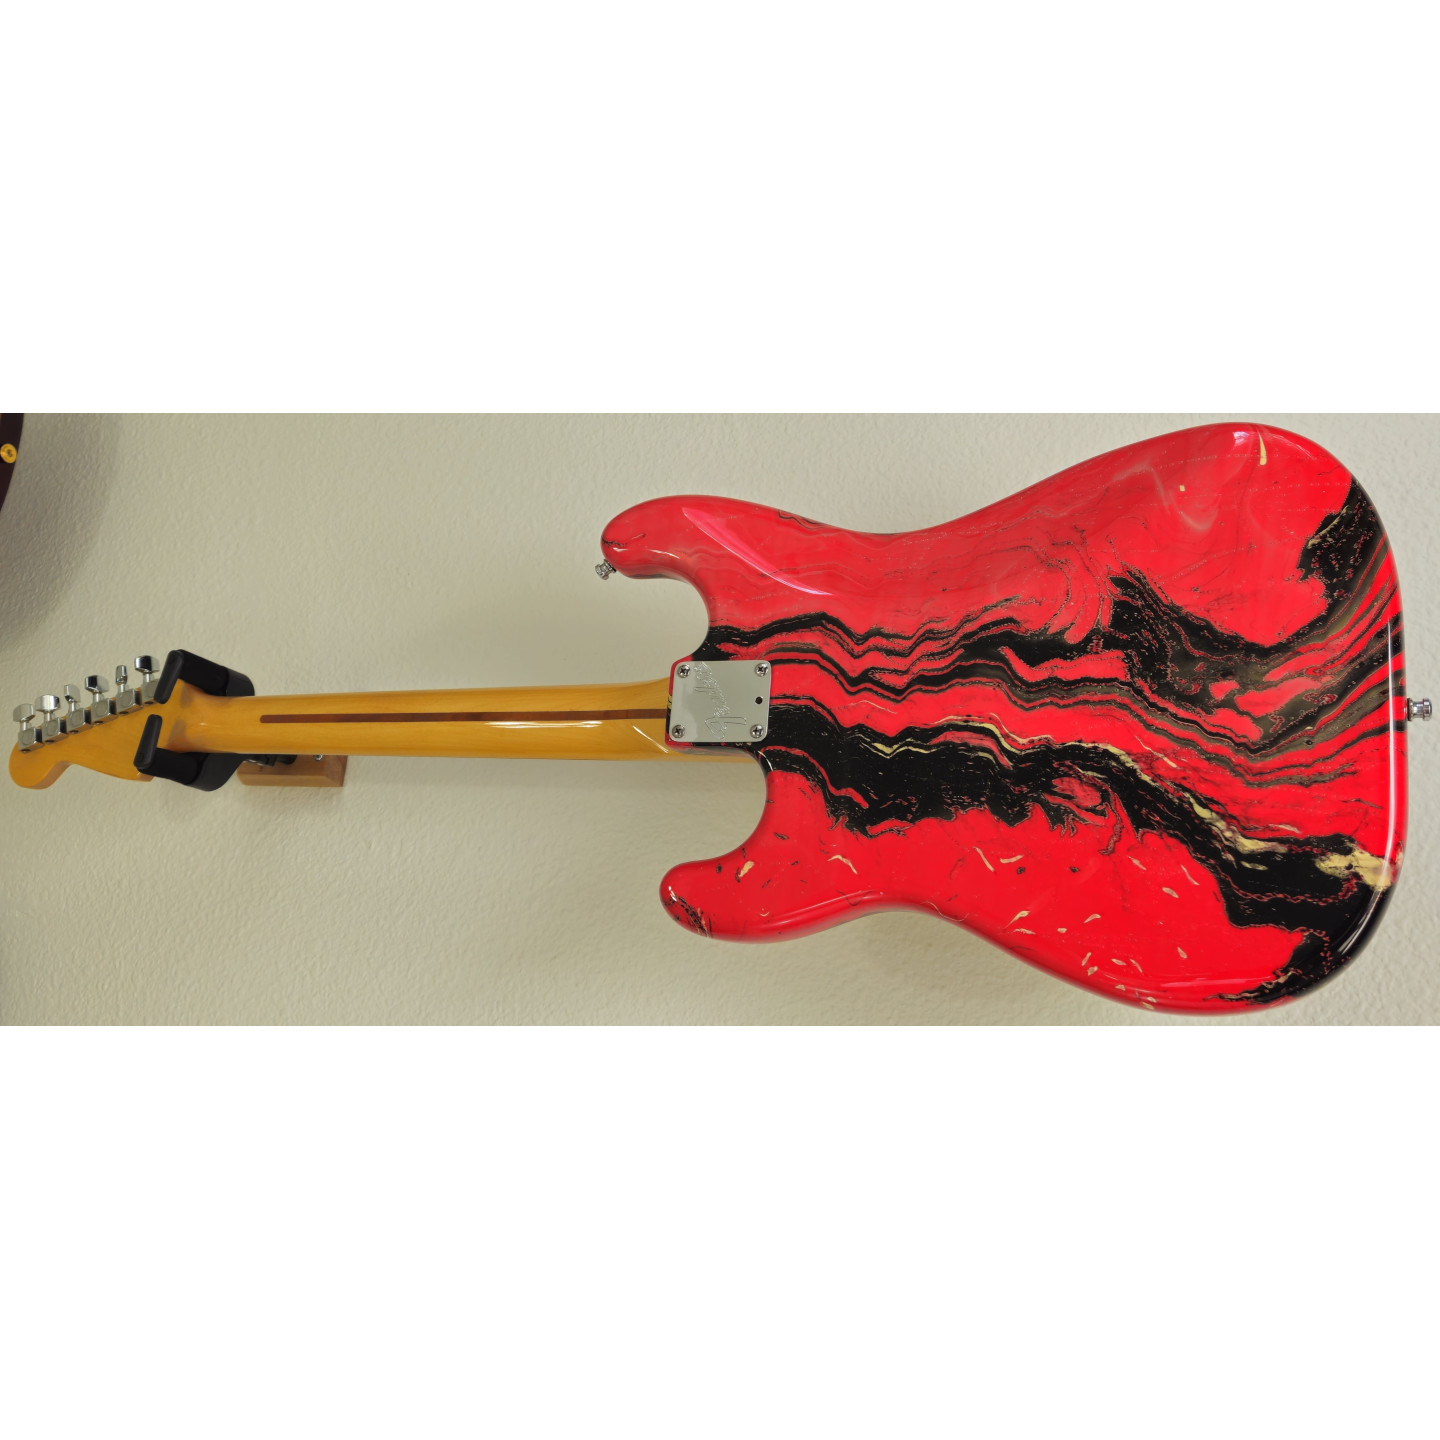 MINT 1983 Fender Bowling Ball American Stratocaster Red Swirl Marble Vintage Electric Guitar